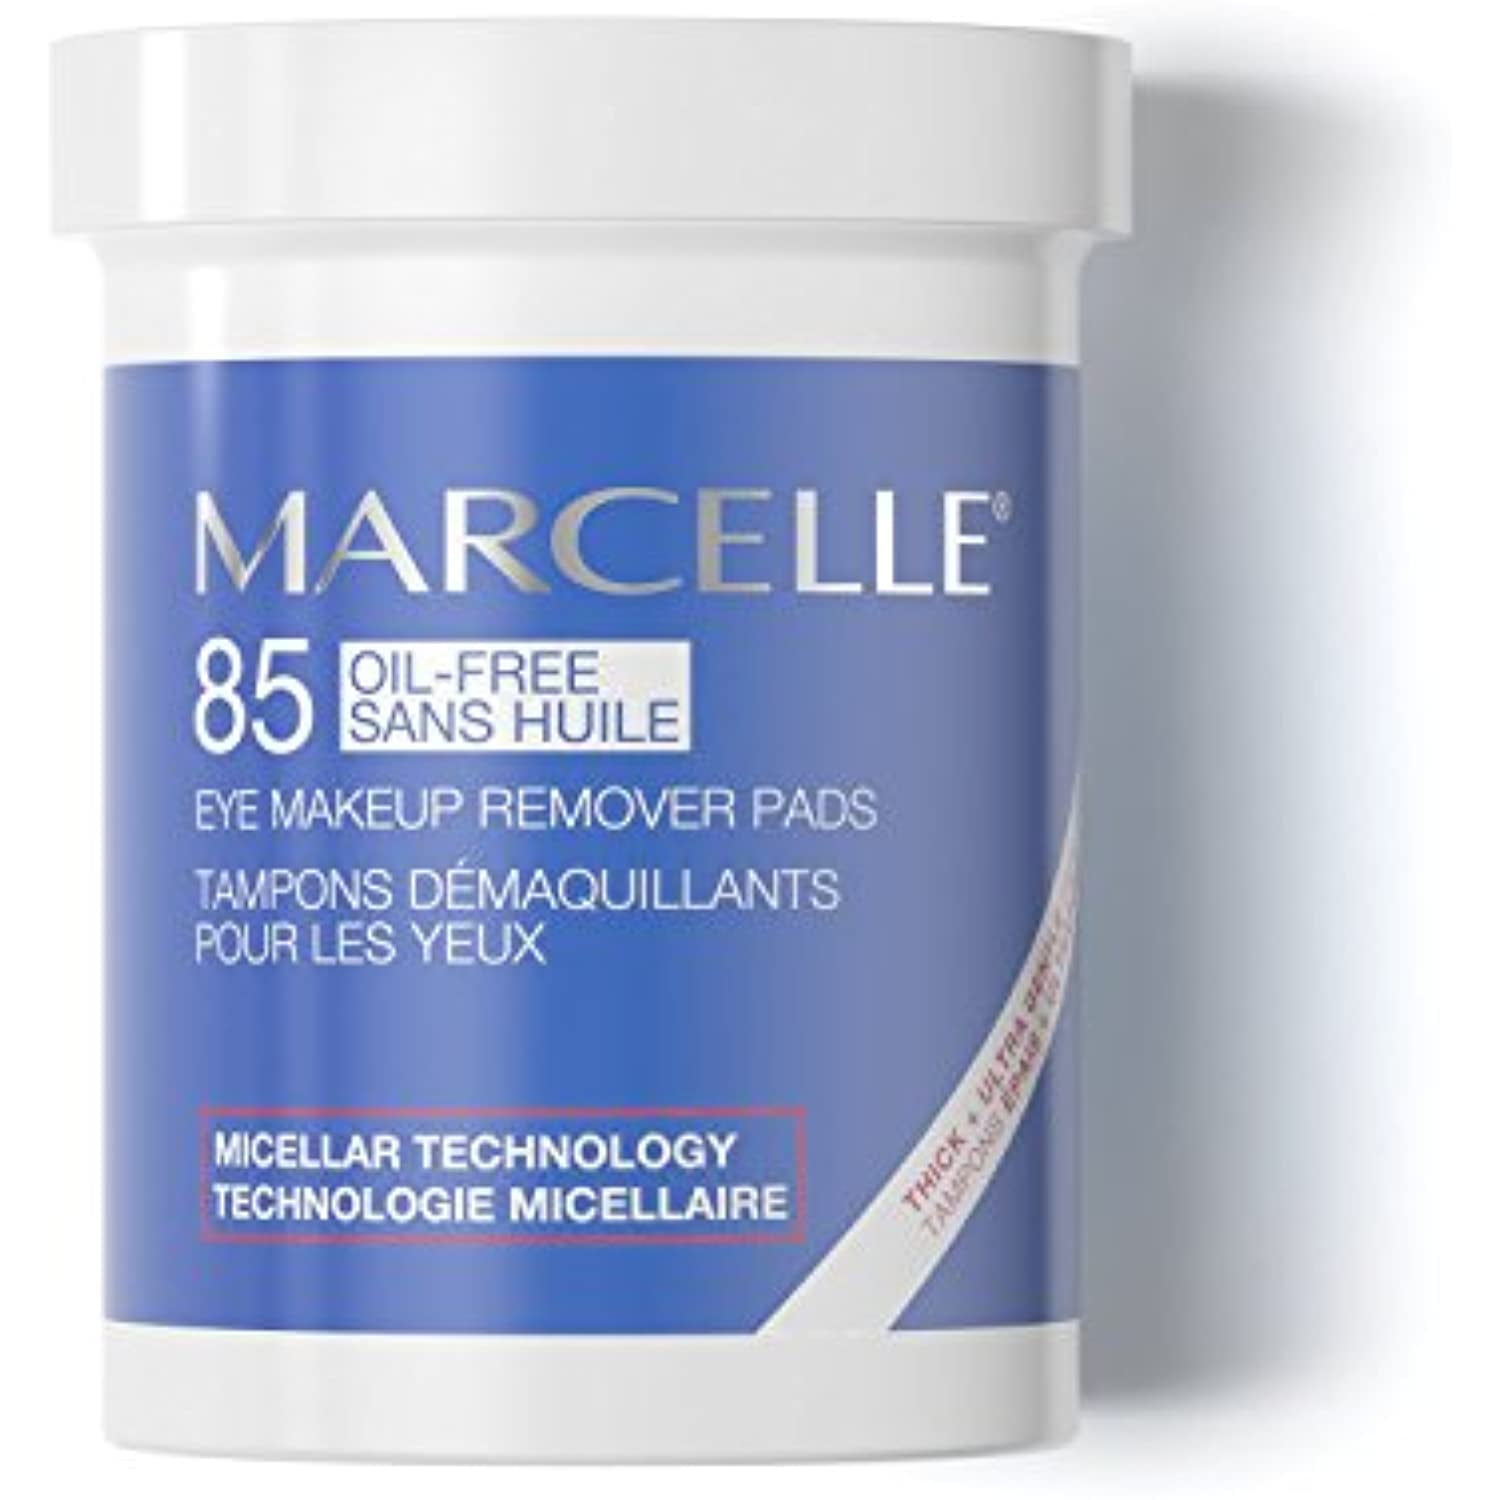 Marcelle Oil-Free Eye Makeup Remover Pads, 85 Pads